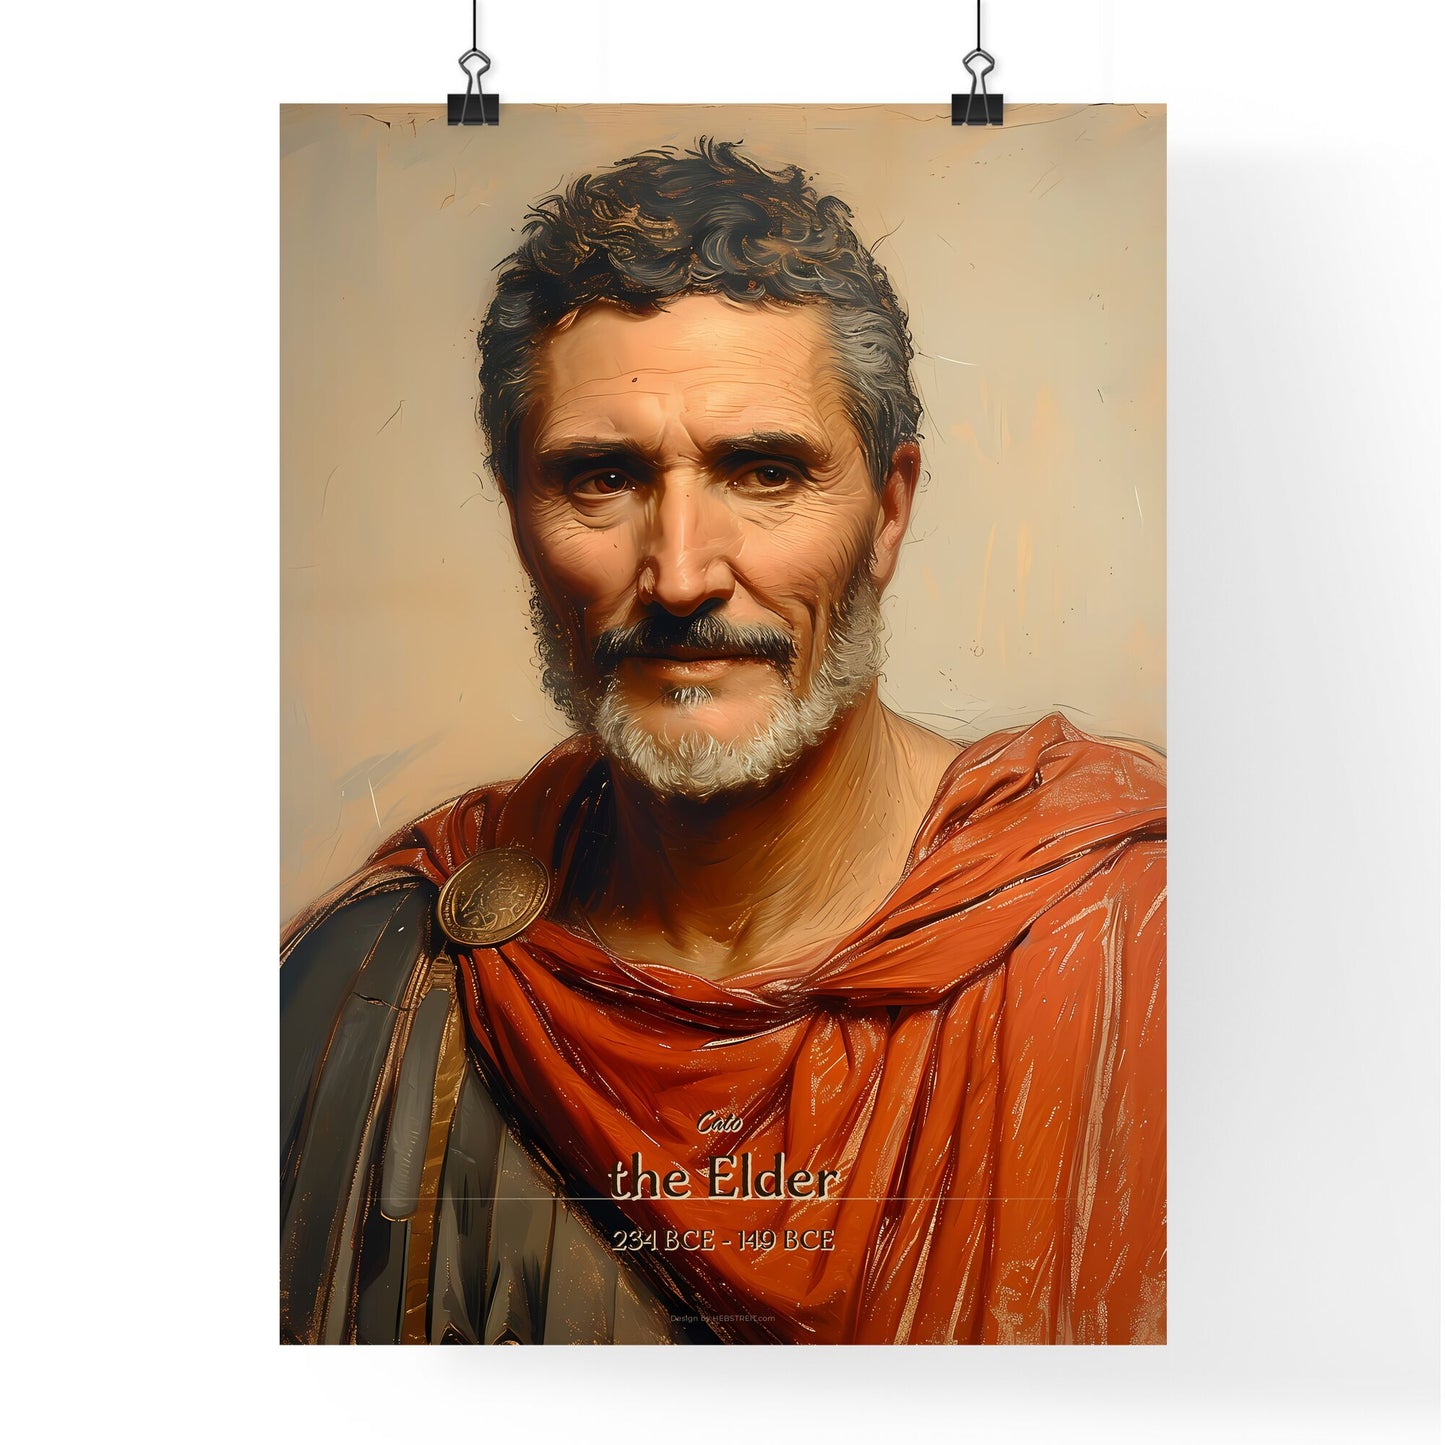 Cato, the Elder, 234 BCE - 149 BCE, A Poster of a man with a beard wearing a red robe Default Title